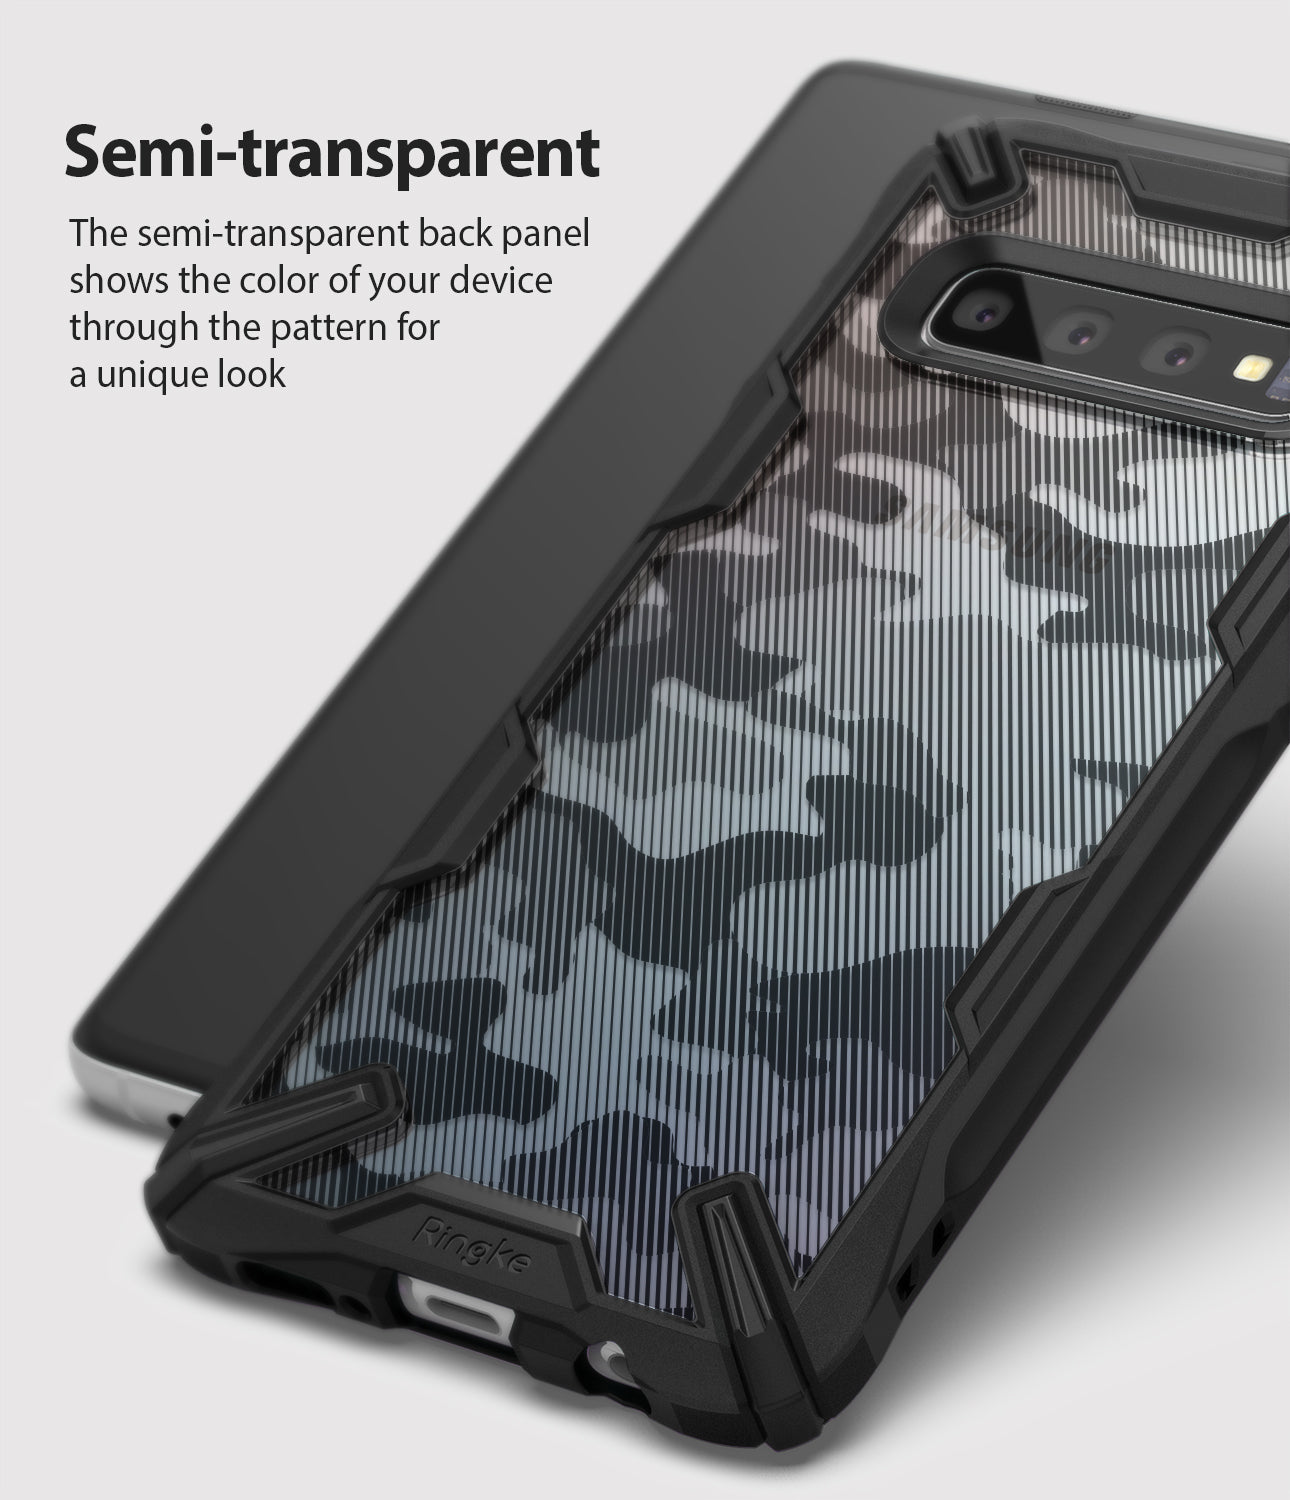 the semi transparent back panel shows the color of your device through the pattern for a unique look